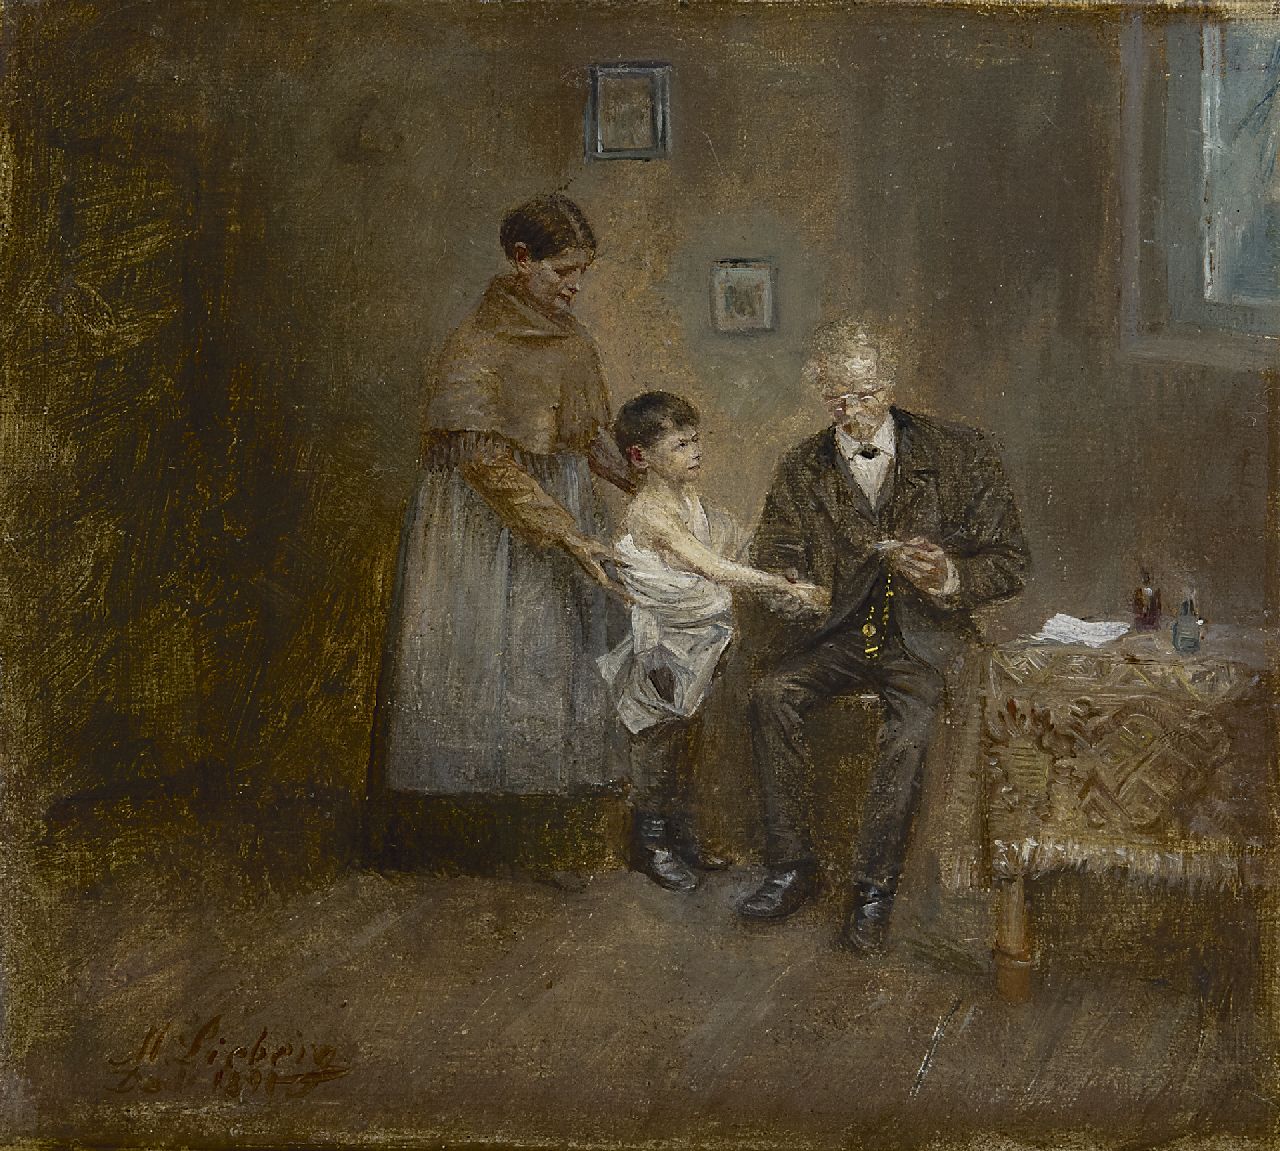 Lieberg M.  | Max Lieberg, At the doctor's, oil on canvas 13.5 x 15.0 cm, signed l.l. and 'Düs' 1891